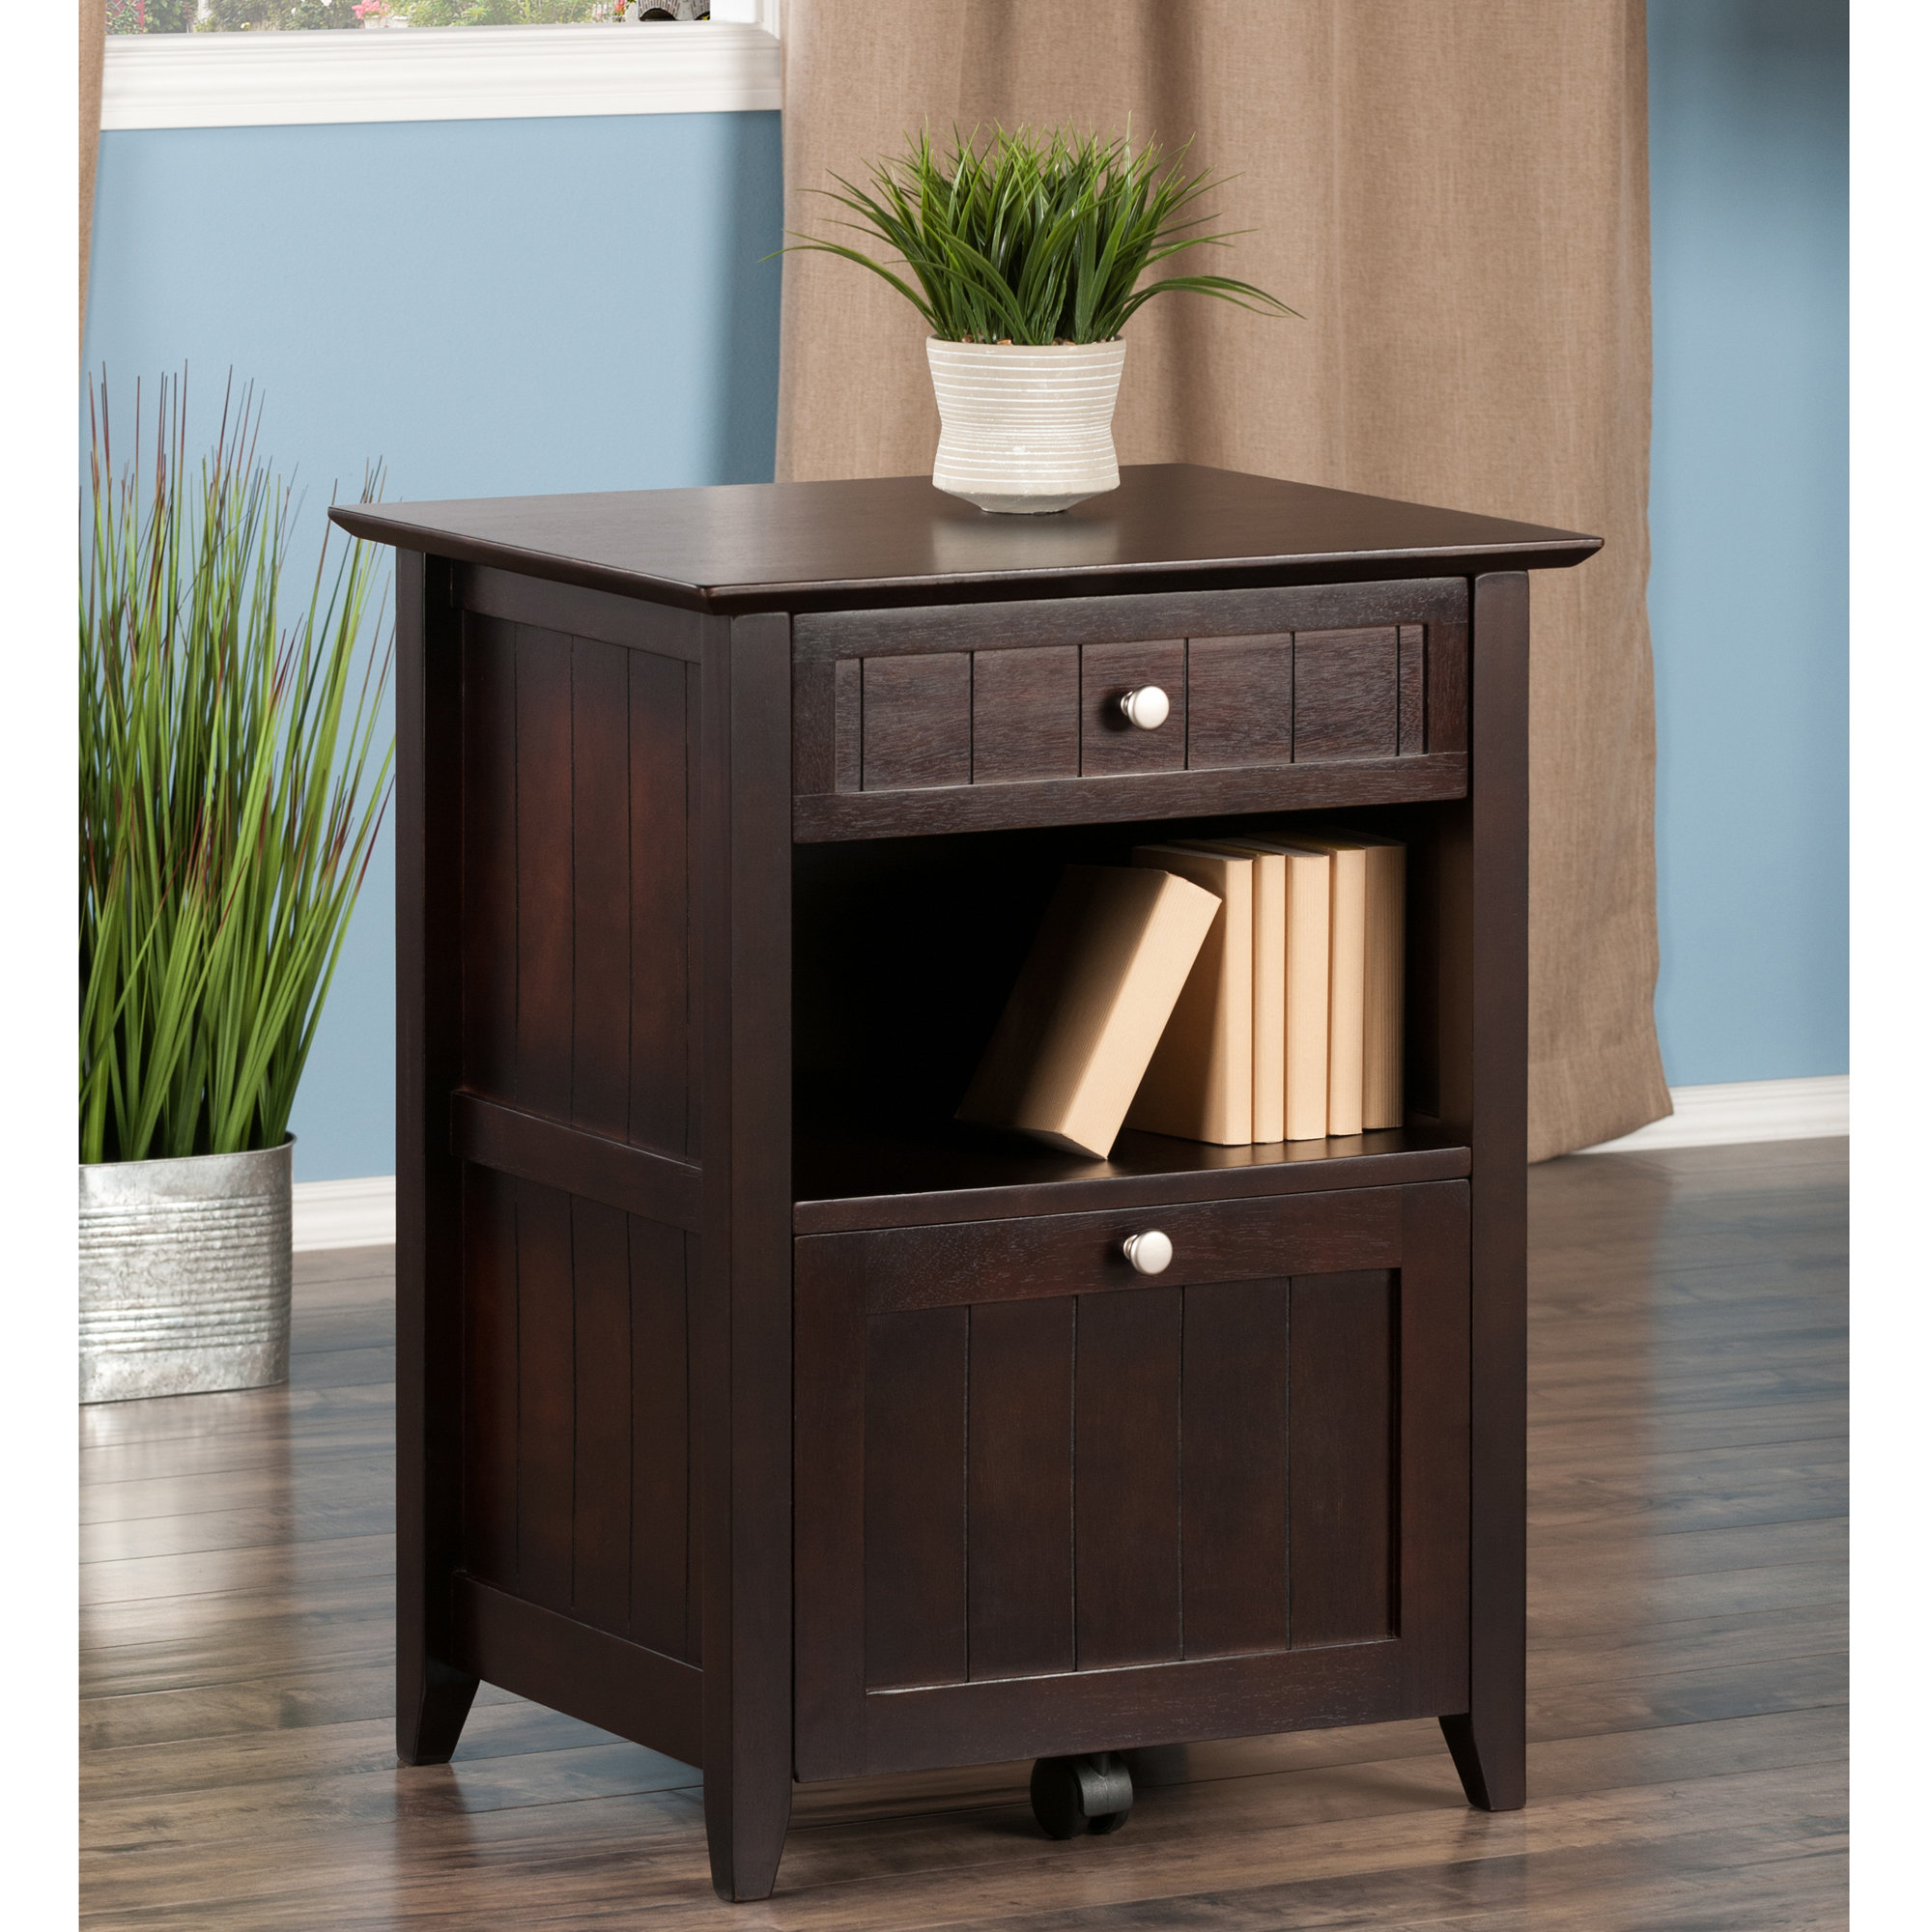 Charlton Home Bonanno 2 Drawer Vertical Filing Cabinet Wayfair intended for sizing 2000 X 2000